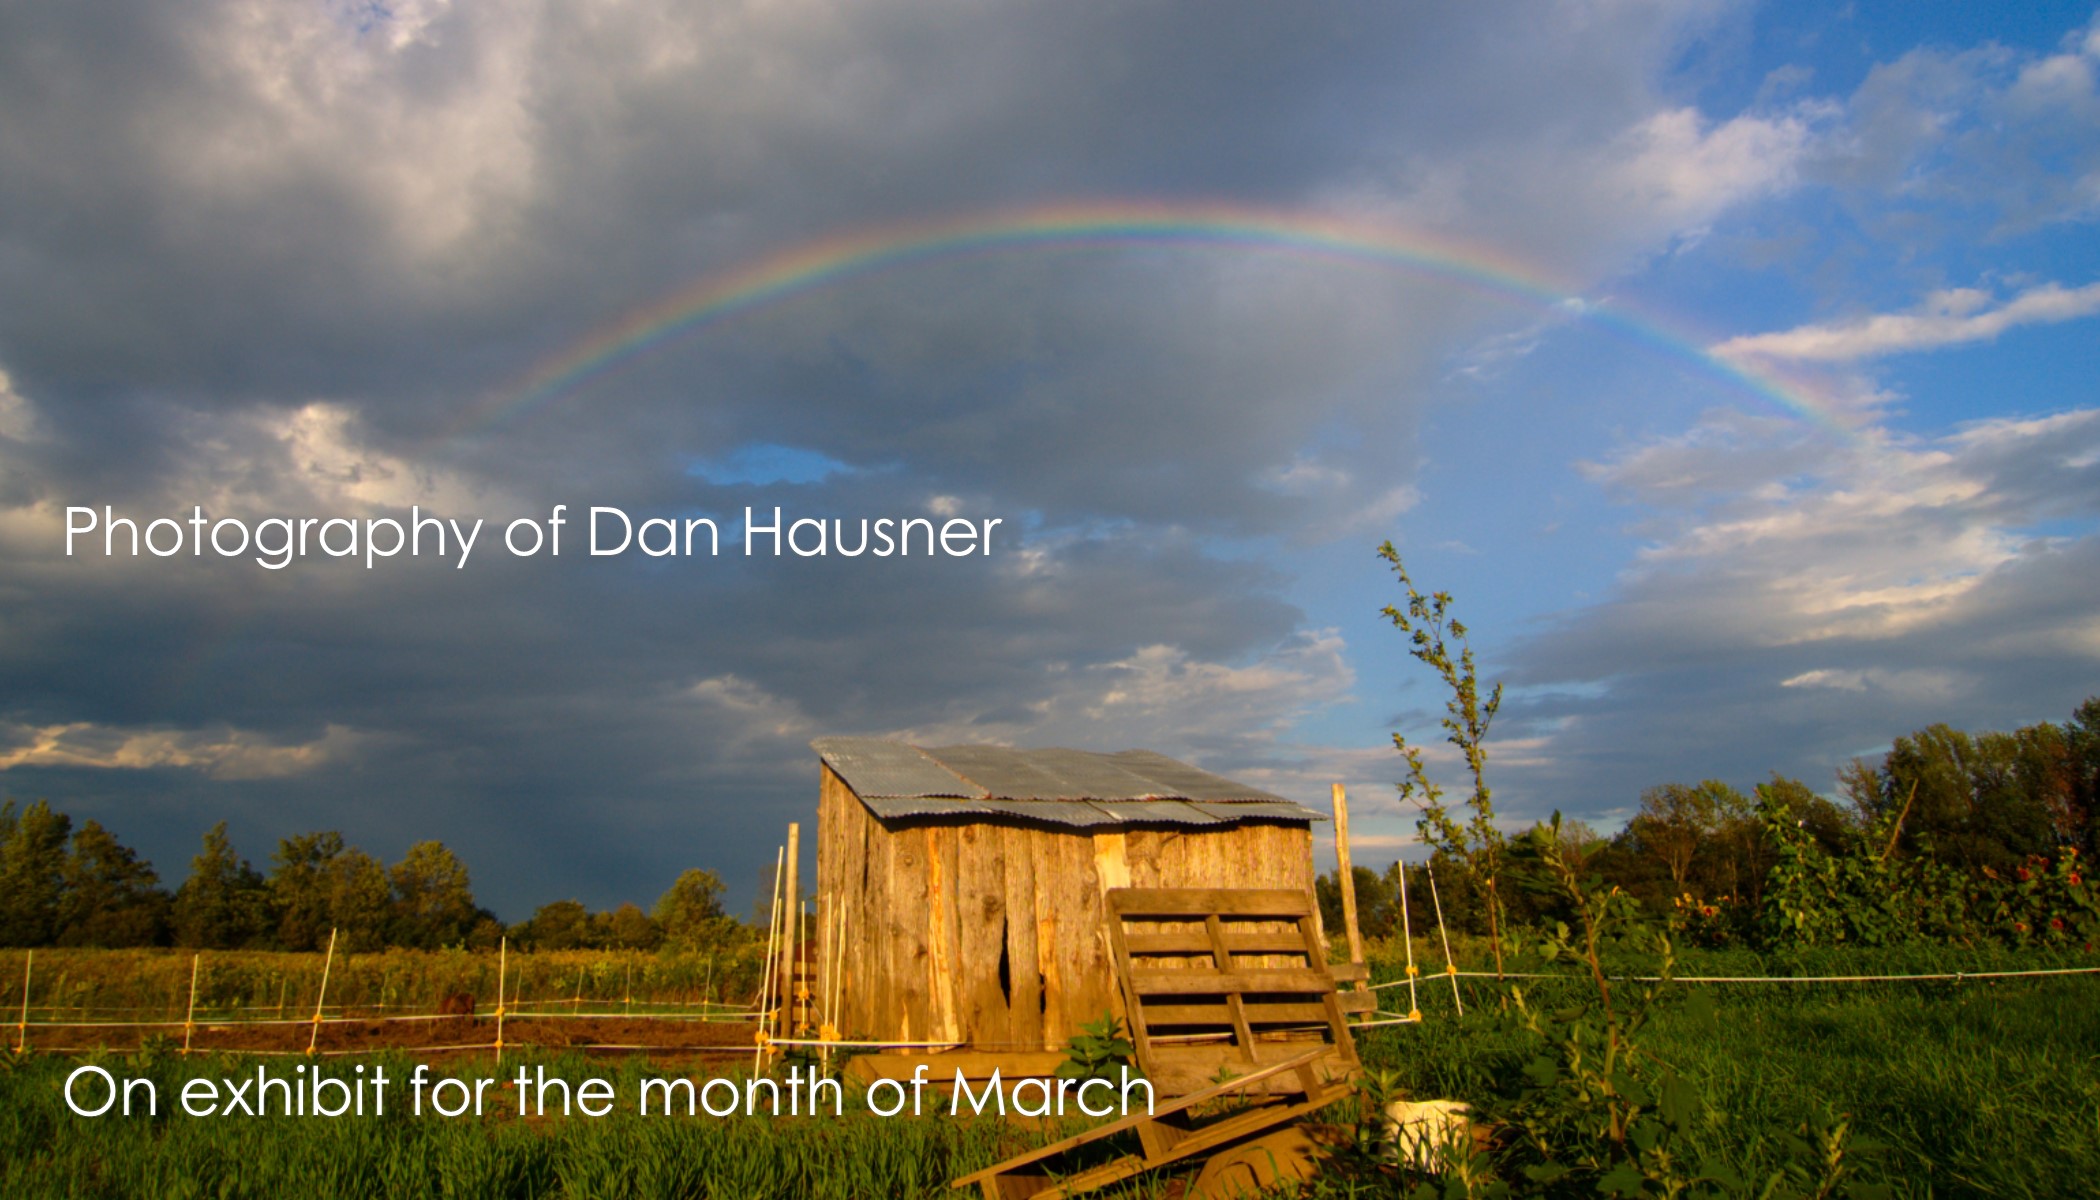 Photography of Dan Hausner on exhibit for the month of March